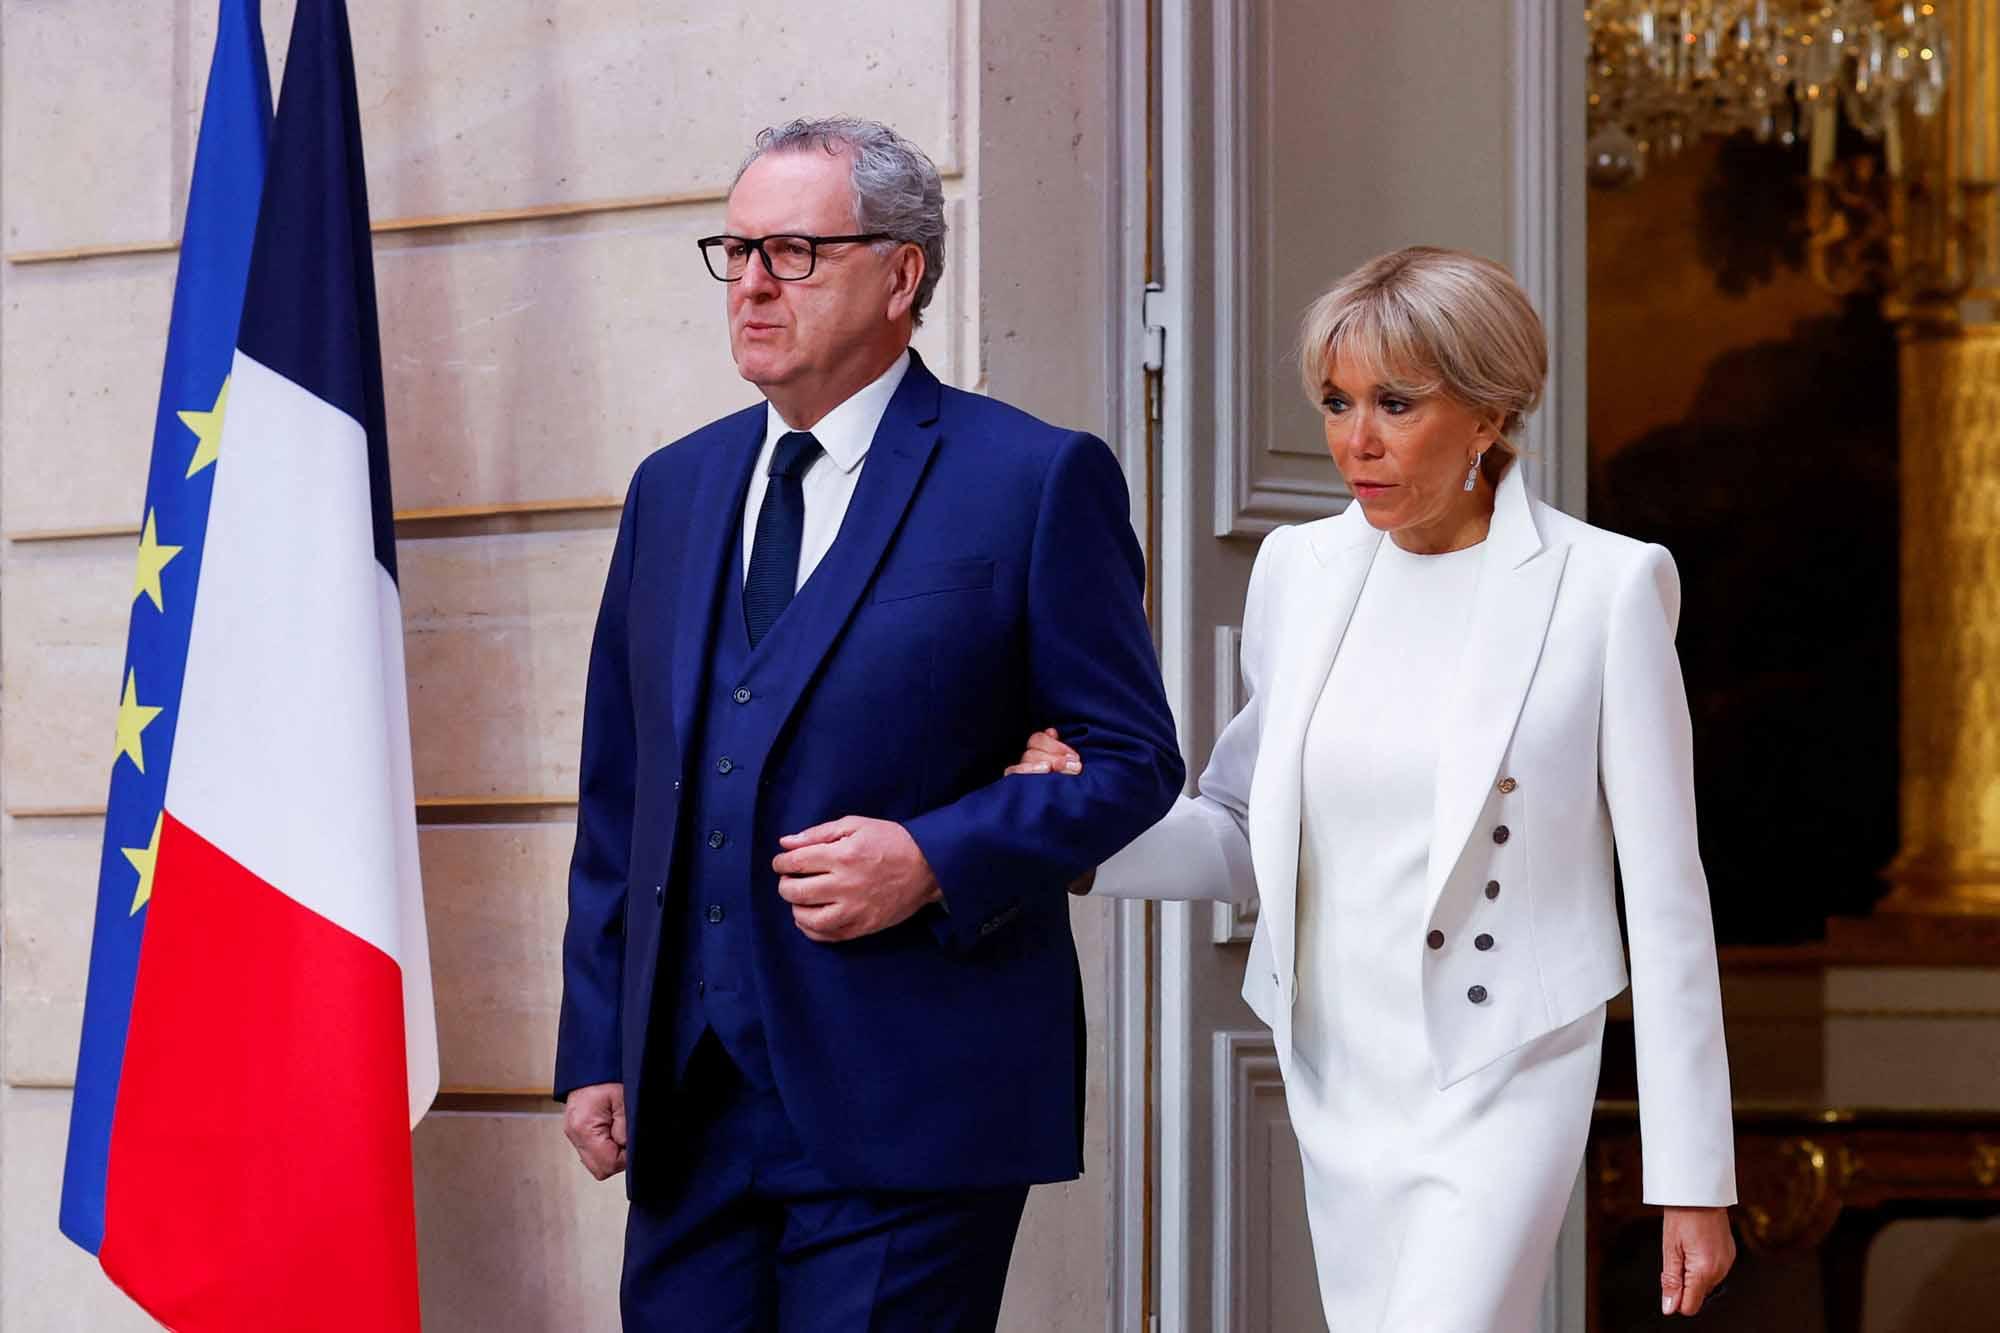 President of the French national assembly Richard Ferrand (L) and French President's wife Brigitte Macron (R) arrive at the Elysee presidential palace in Paris on May 7, 2022, to attend the investiture ceremony of Emmanuel Macron as French President, following his re-election last April 24. (Photo by GONZALO FUENTES / POOL / AFP) 